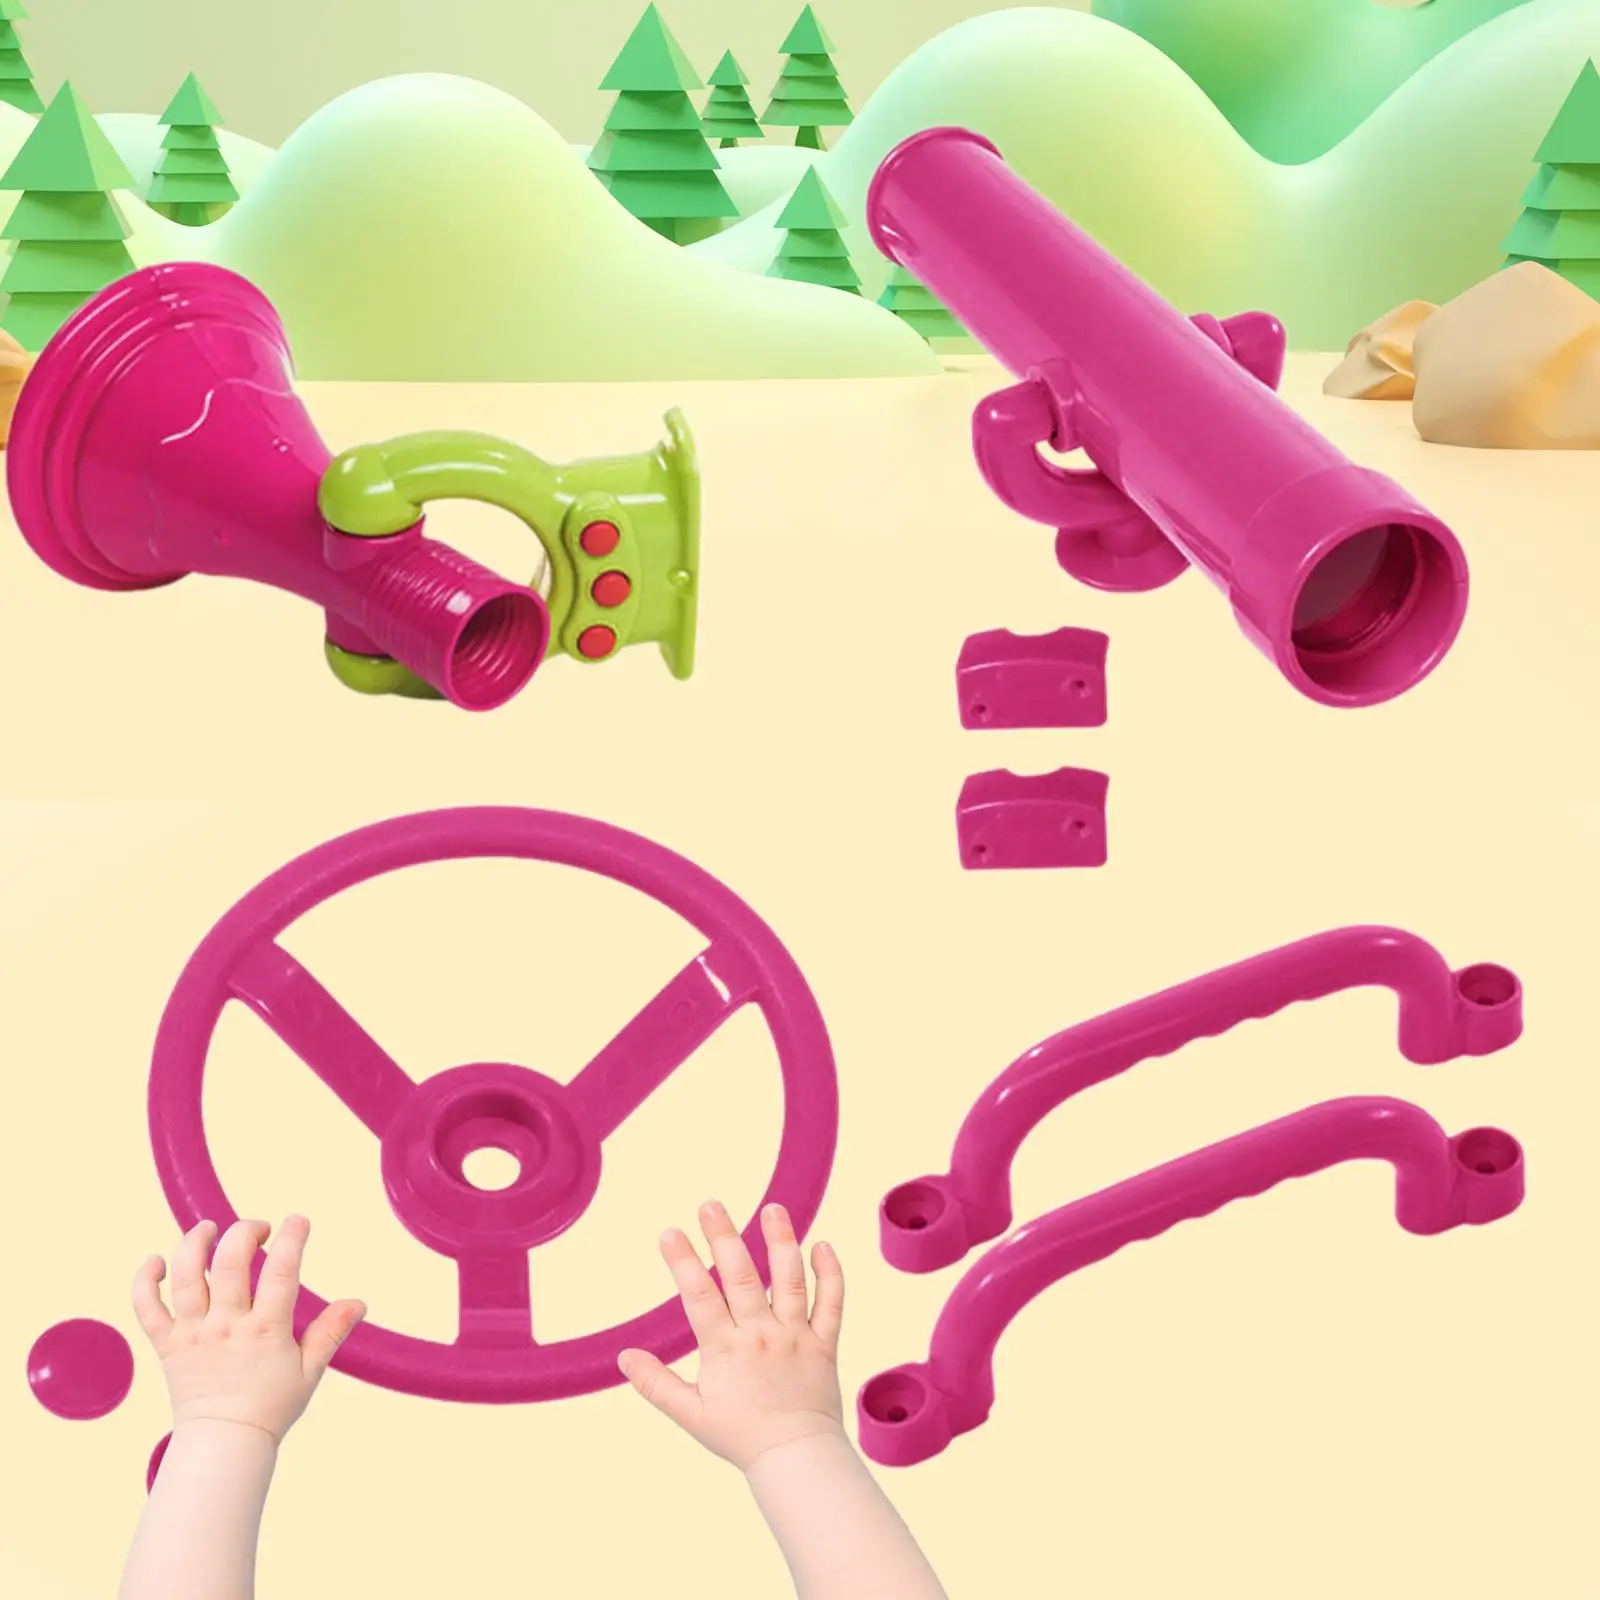 4Pcs Playground Accessories Pink Trumpet Attachments Swingset Attachments for Outdoor Playhouse Backyard Swingset Treehouse Kids